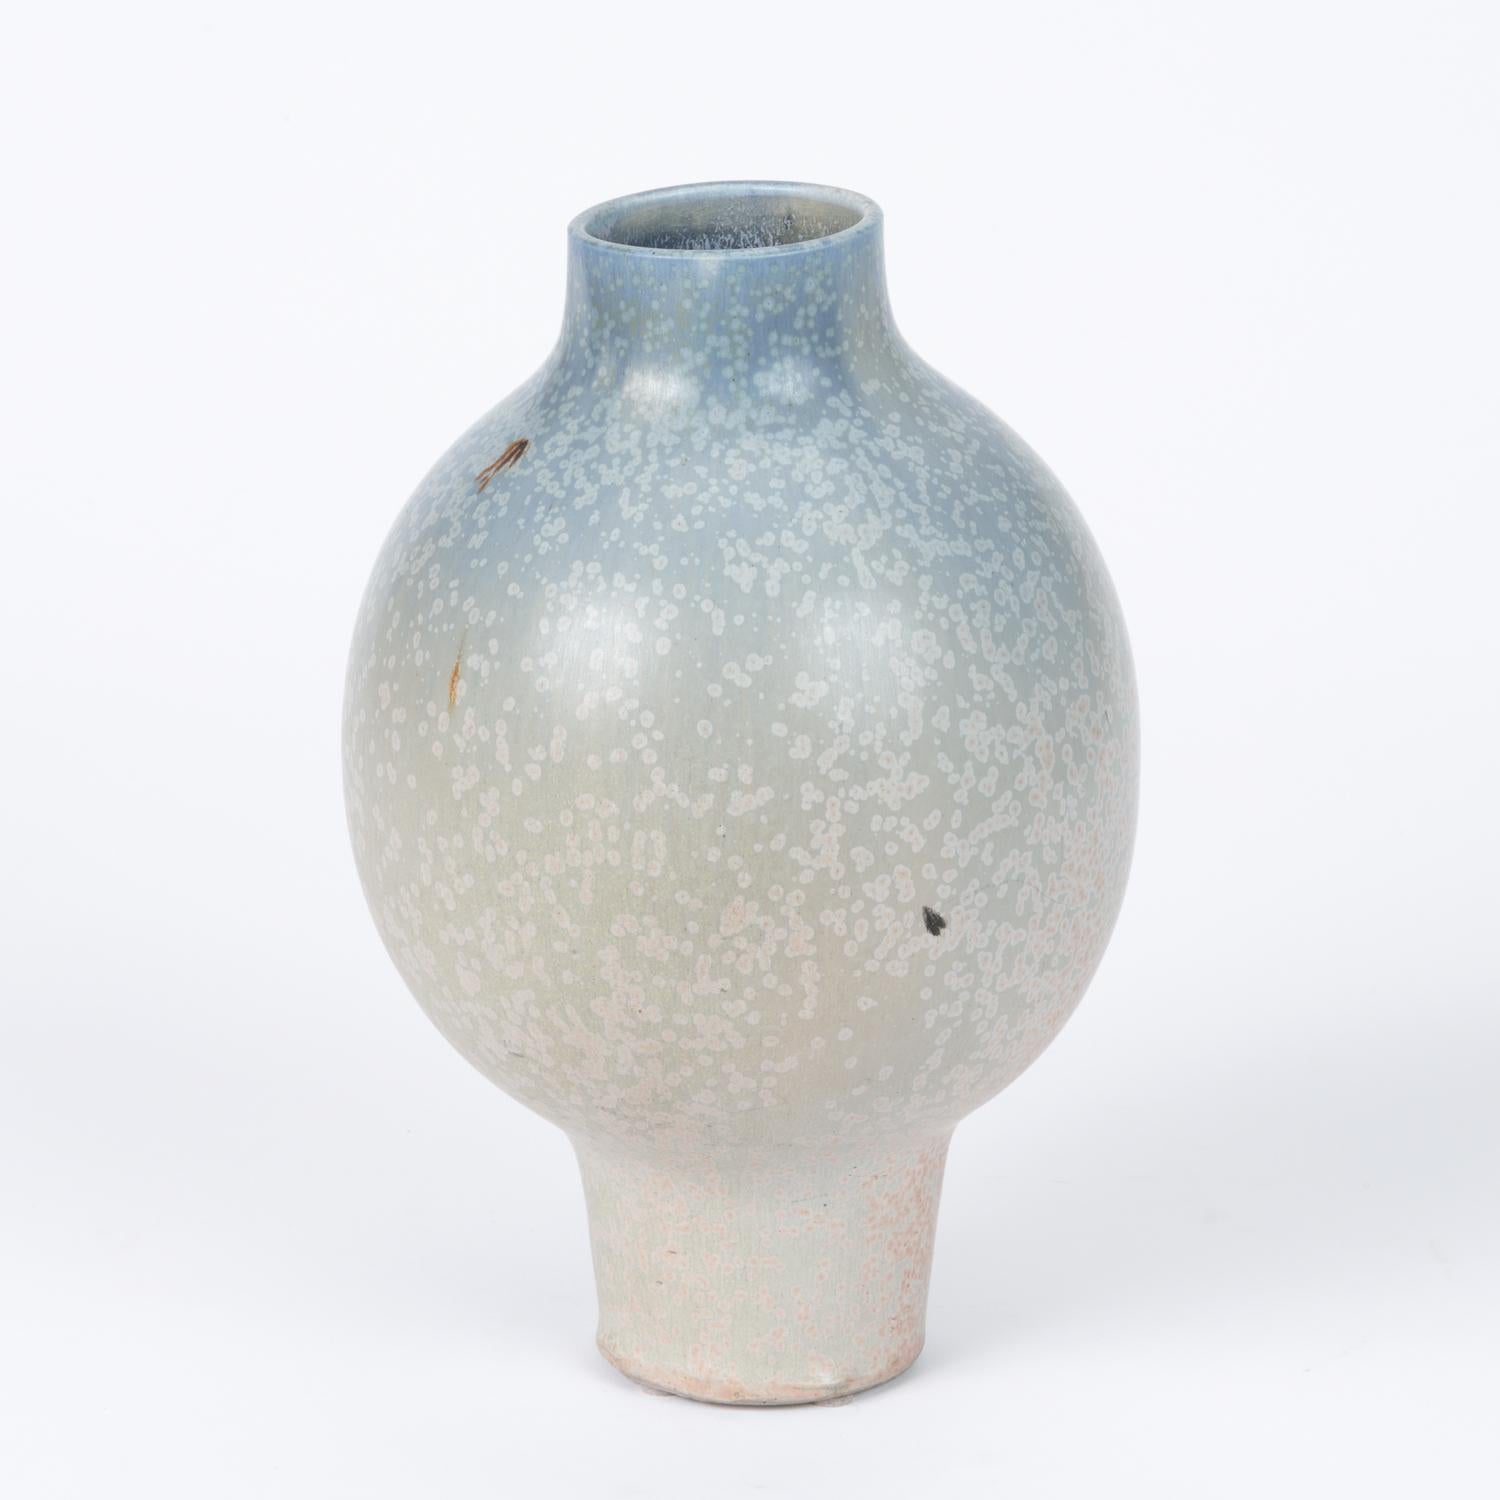 Studio pottery ceramic vase in a beautiful ombre glaze. The pieces features a spherical center form that tapers into a narrow base. The glaze consists of soft blue and light cool gray tones that are accented by contrasting pink and blue speckles